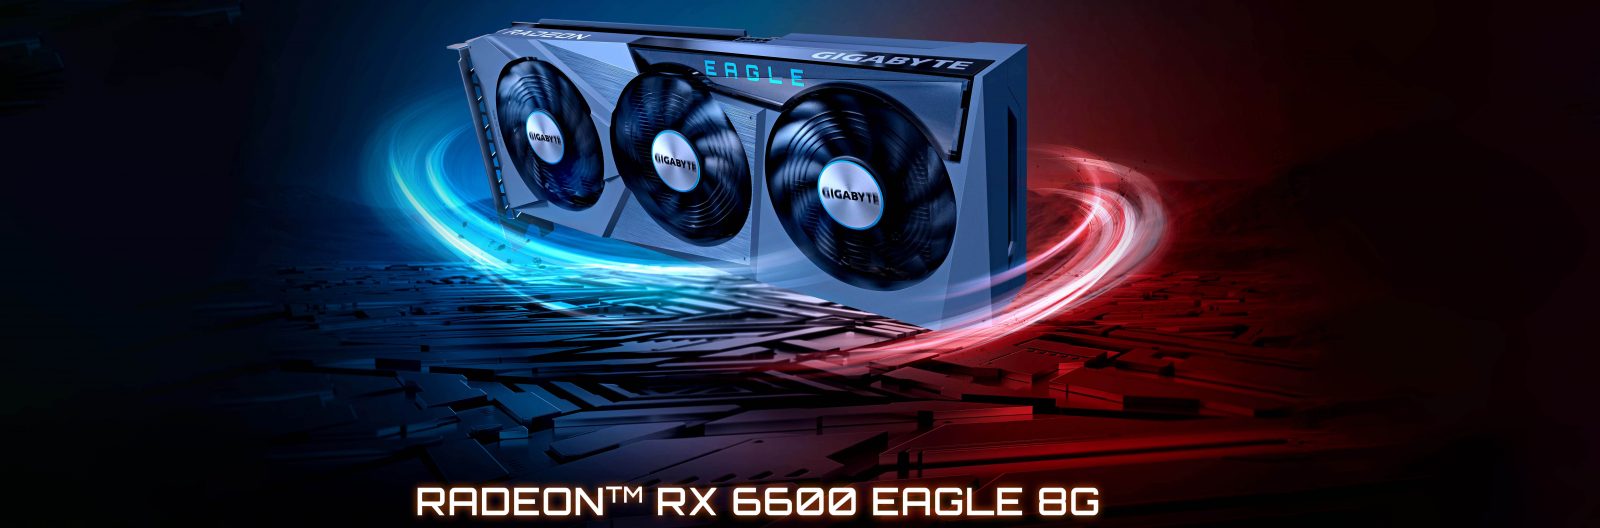 Gigabyte launches Radeon RX 6600 EAGLE 